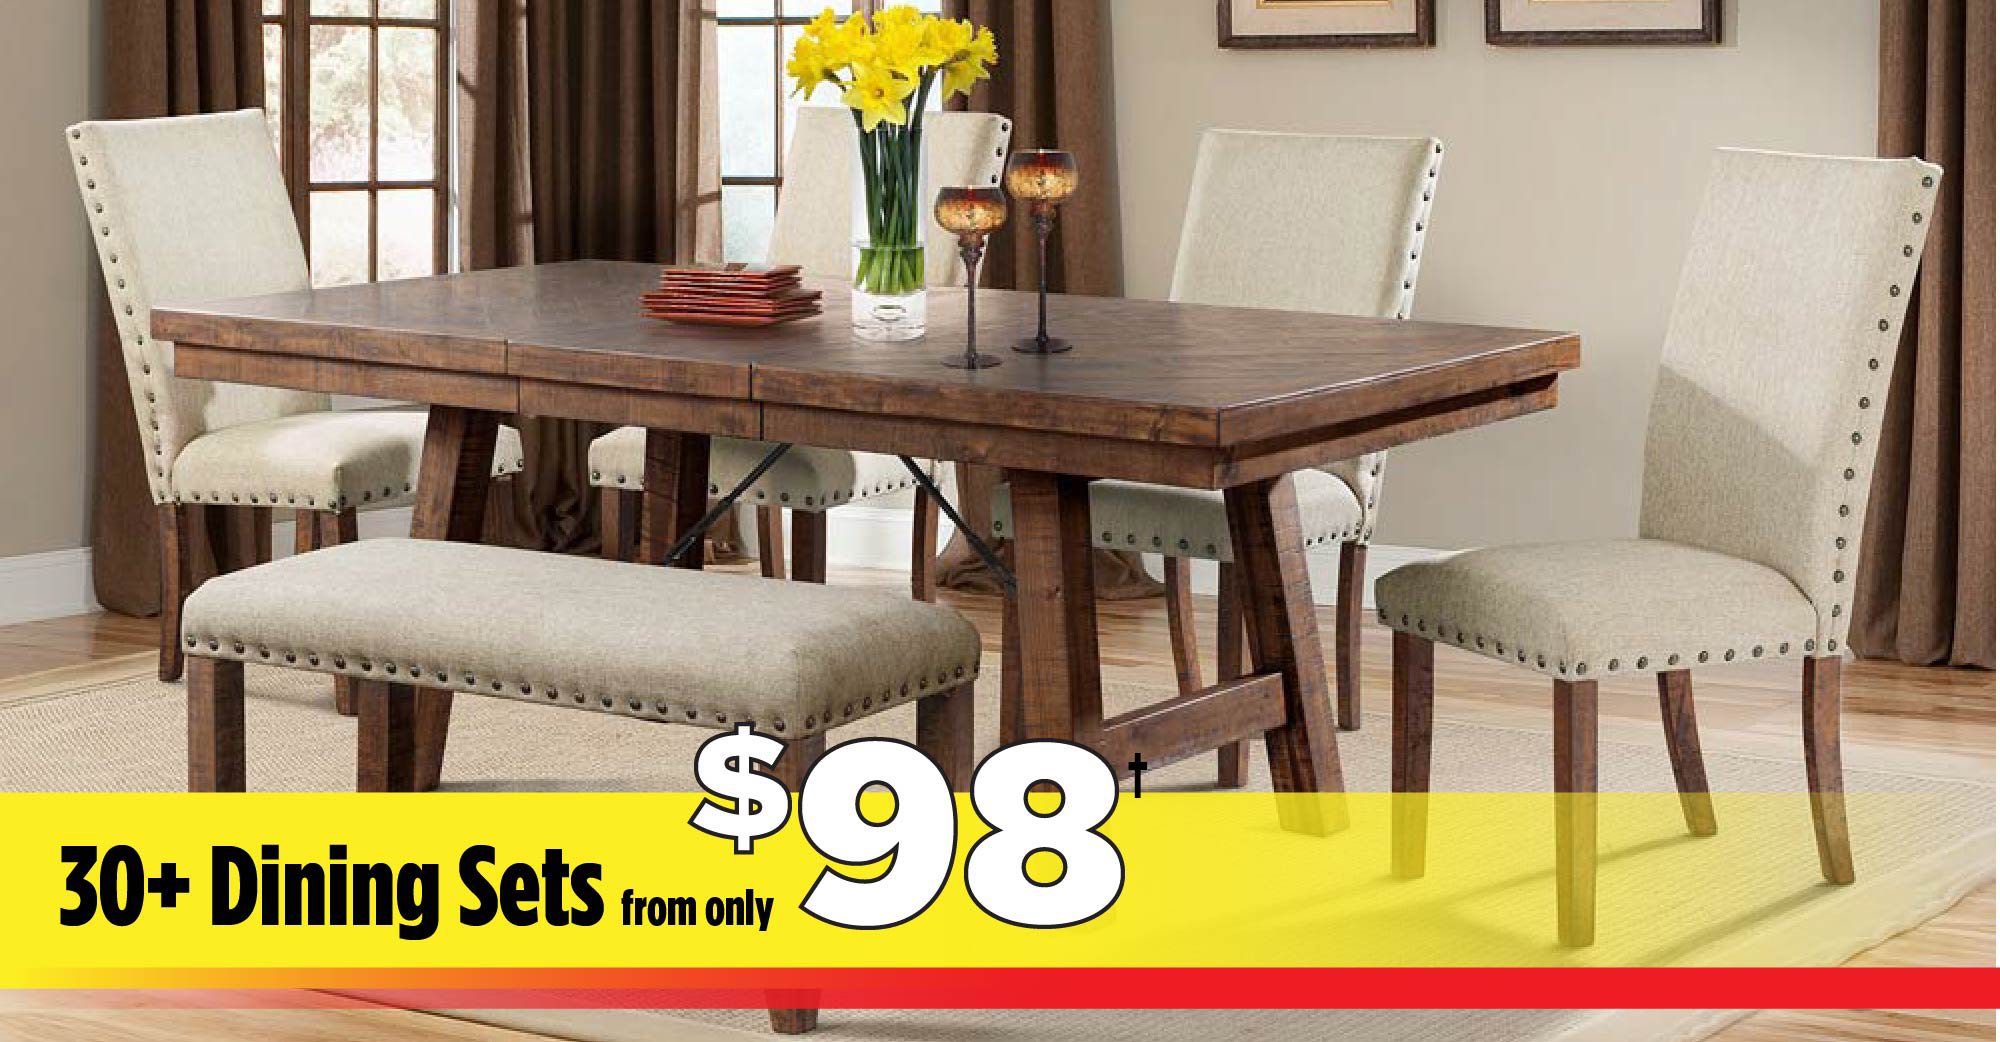 Dining Sets from only $98!